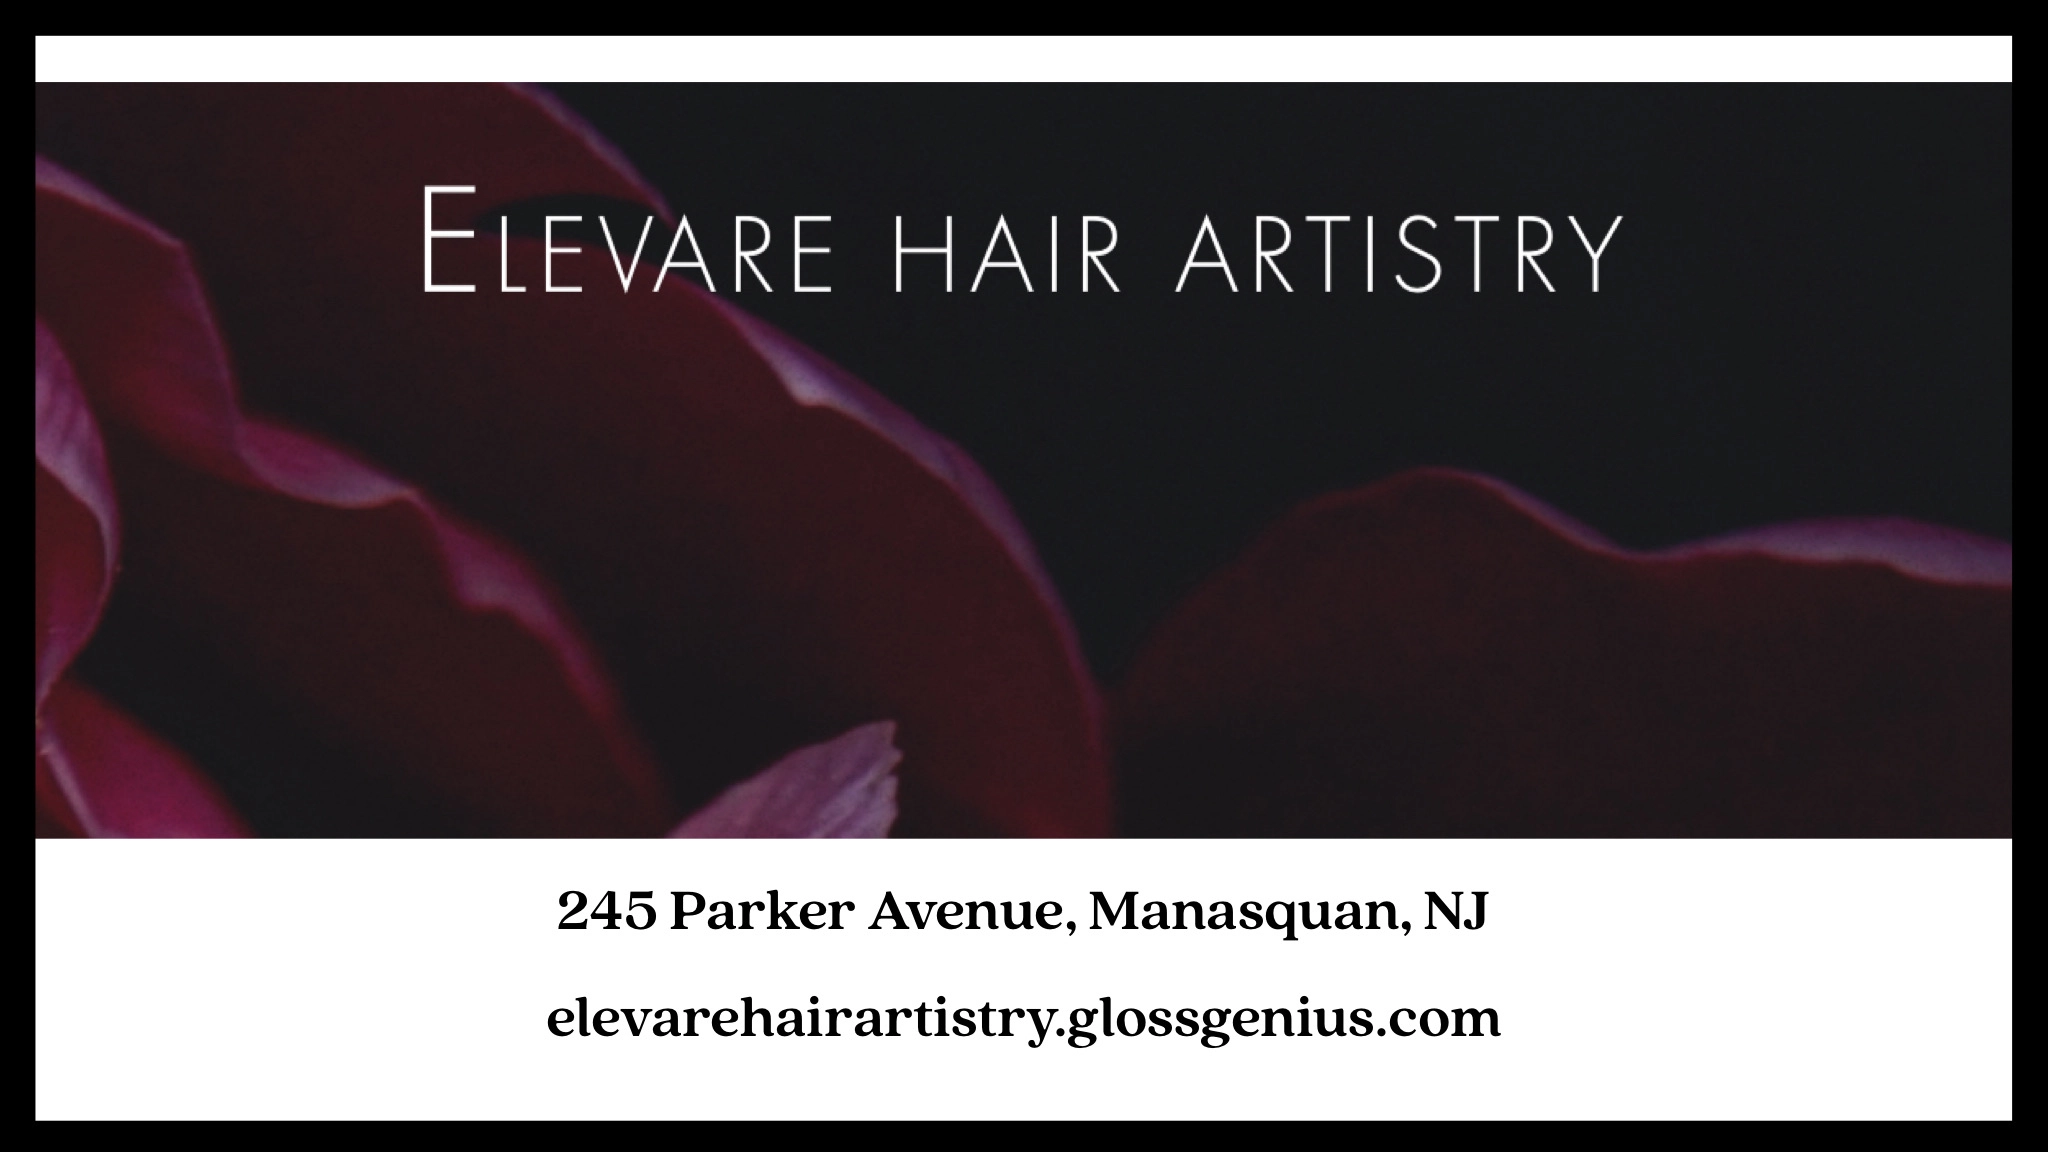 Elevare Hair Artistry Graphic